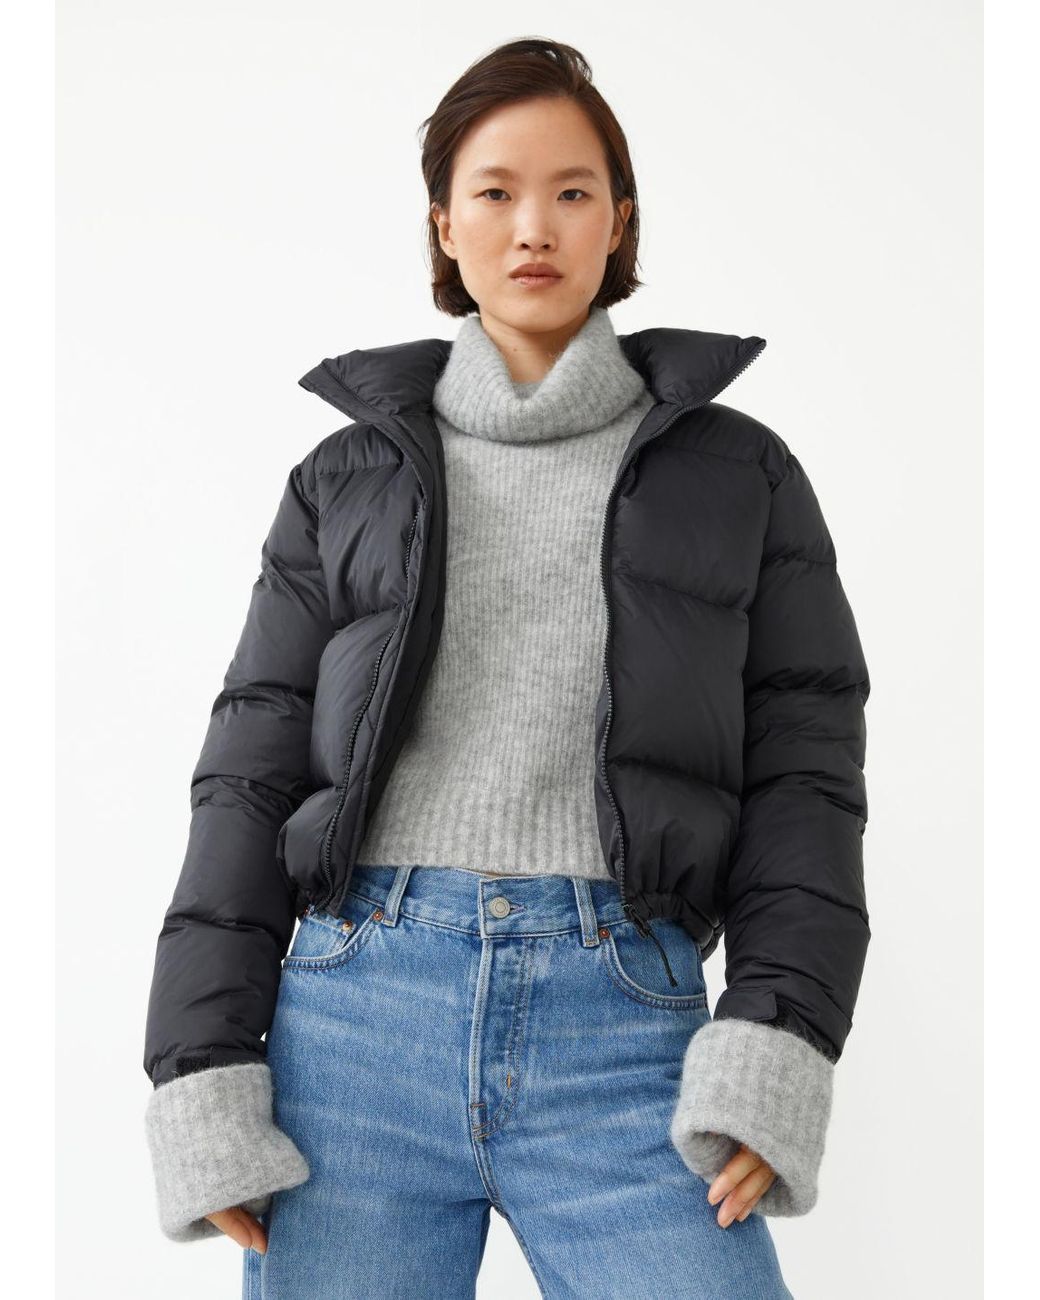 & Other Stories Boxy Puffer Jacket in Black | Lyst